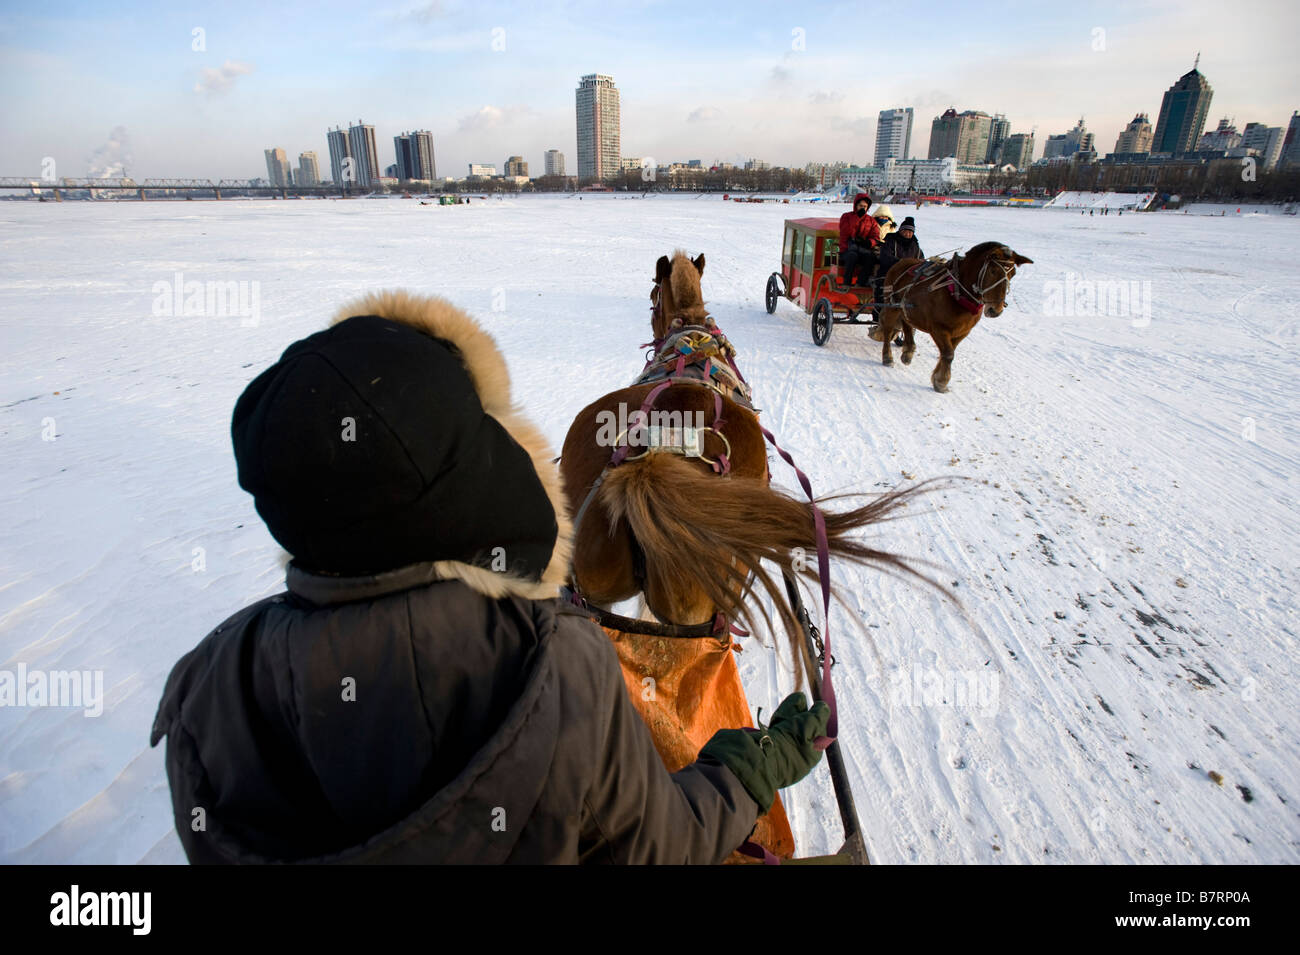 Horse drawn carriages carry people and tourists across frozen Songhua River in Harbin northern China during winter 2009 Stock Photo